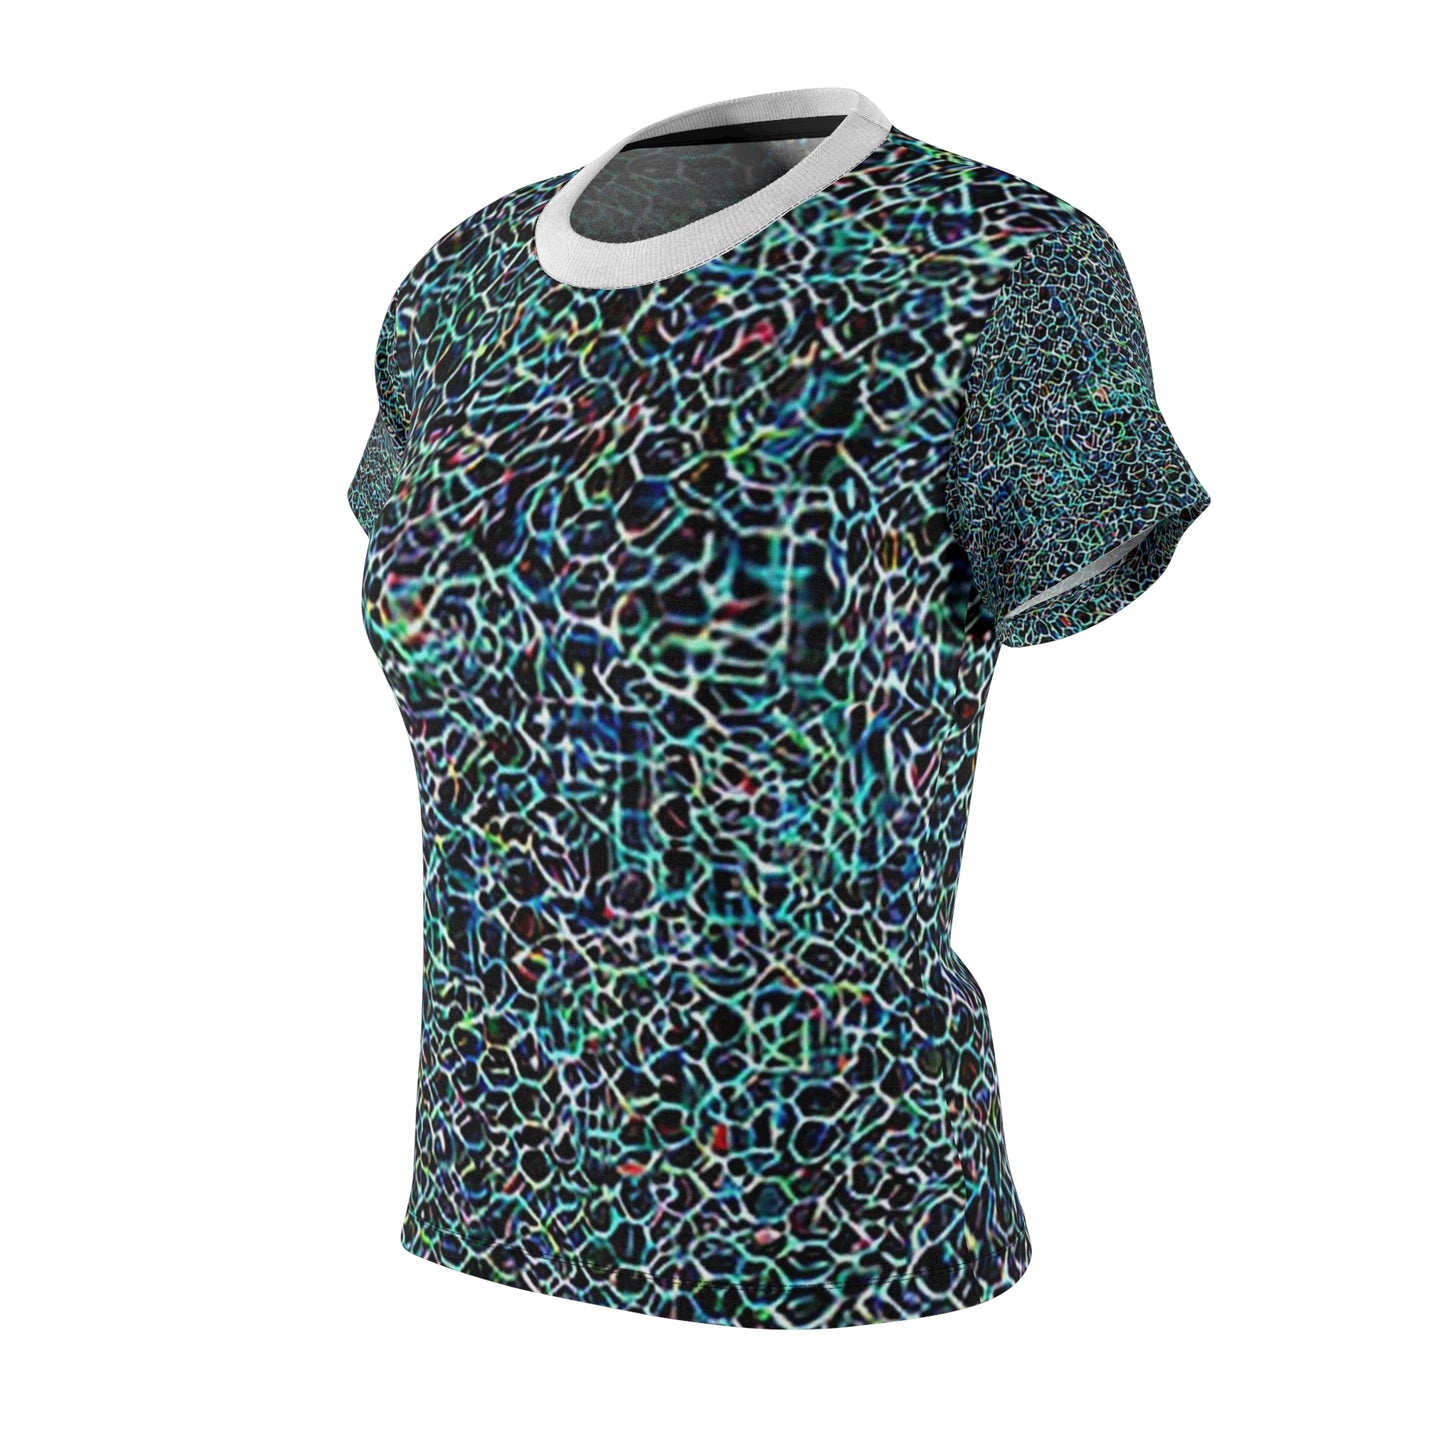 Anti Facial Recognition / Adversarial Pattern Women's Cut & Sew Tee